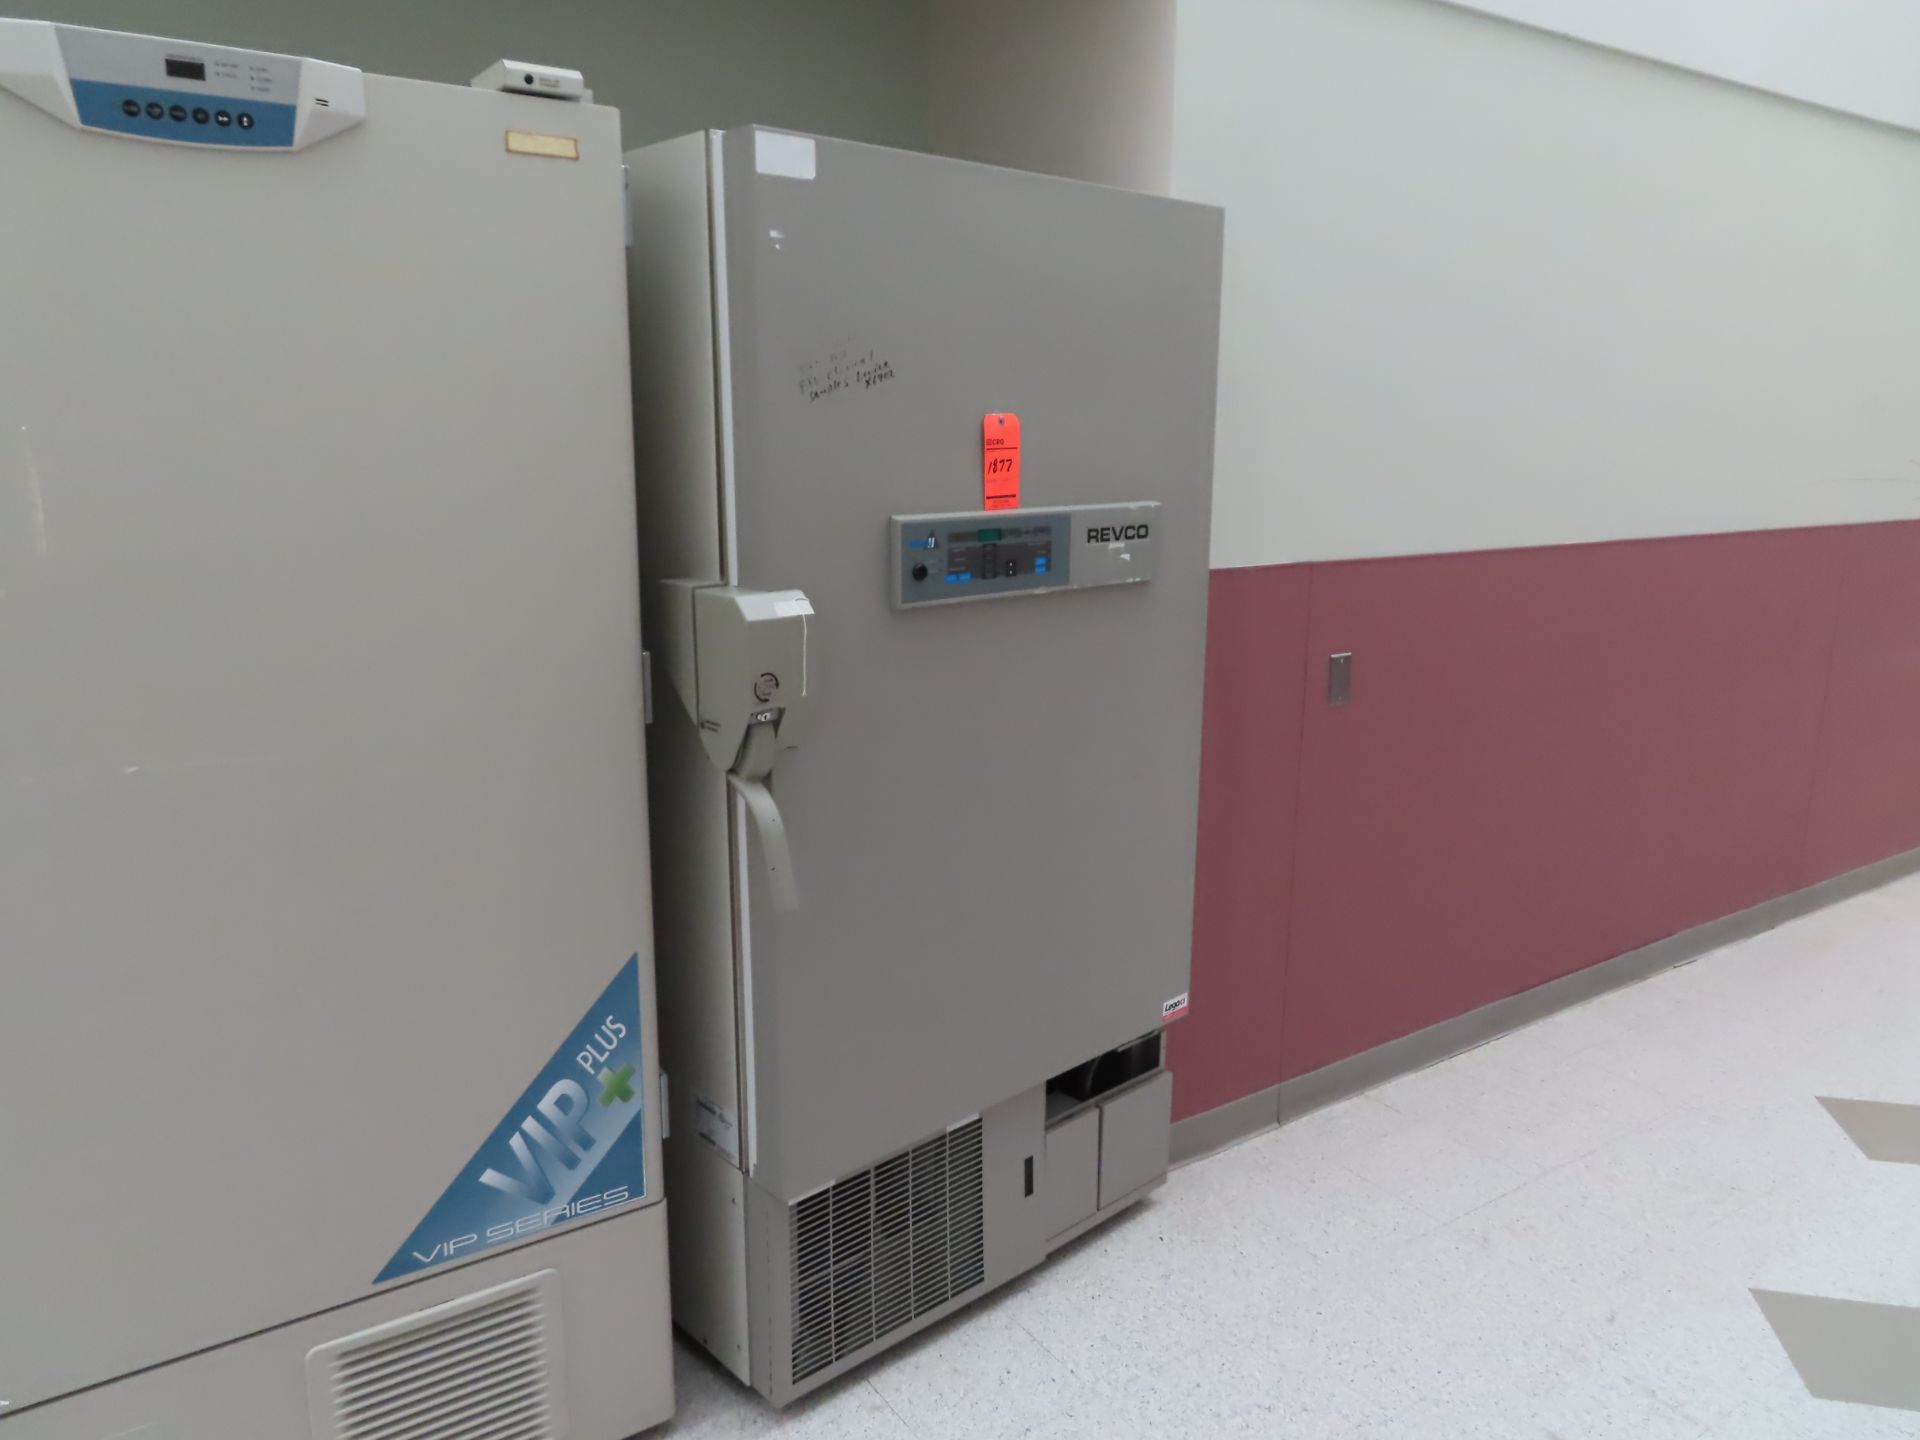 Revco ULT2586-9S1-A36 freezer, s/n 020N-622507-SN, location B wing, 3rd floor, hallway outside of